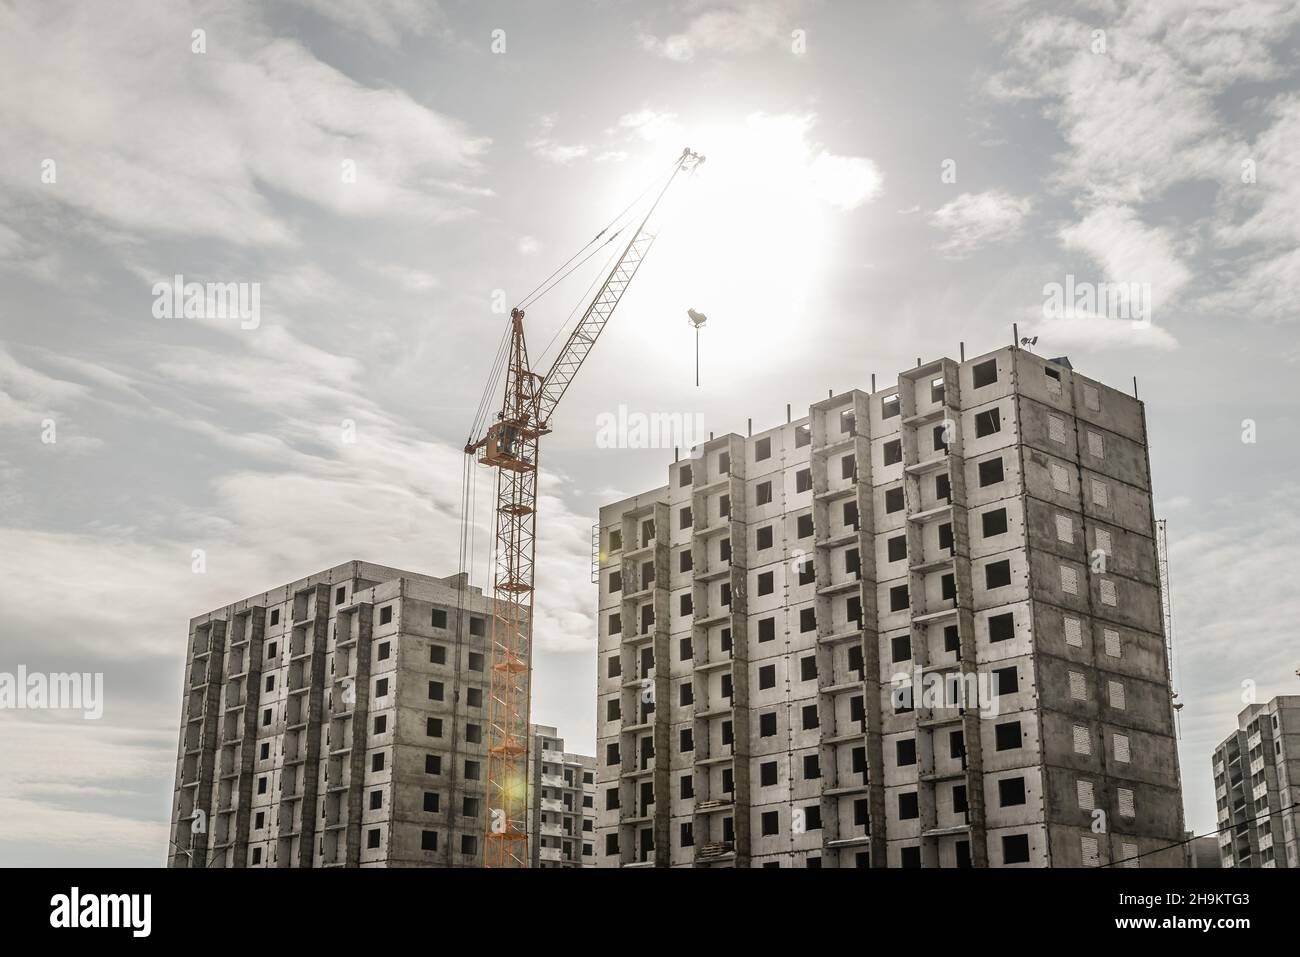 New high block construction with a crane. Stock Photo